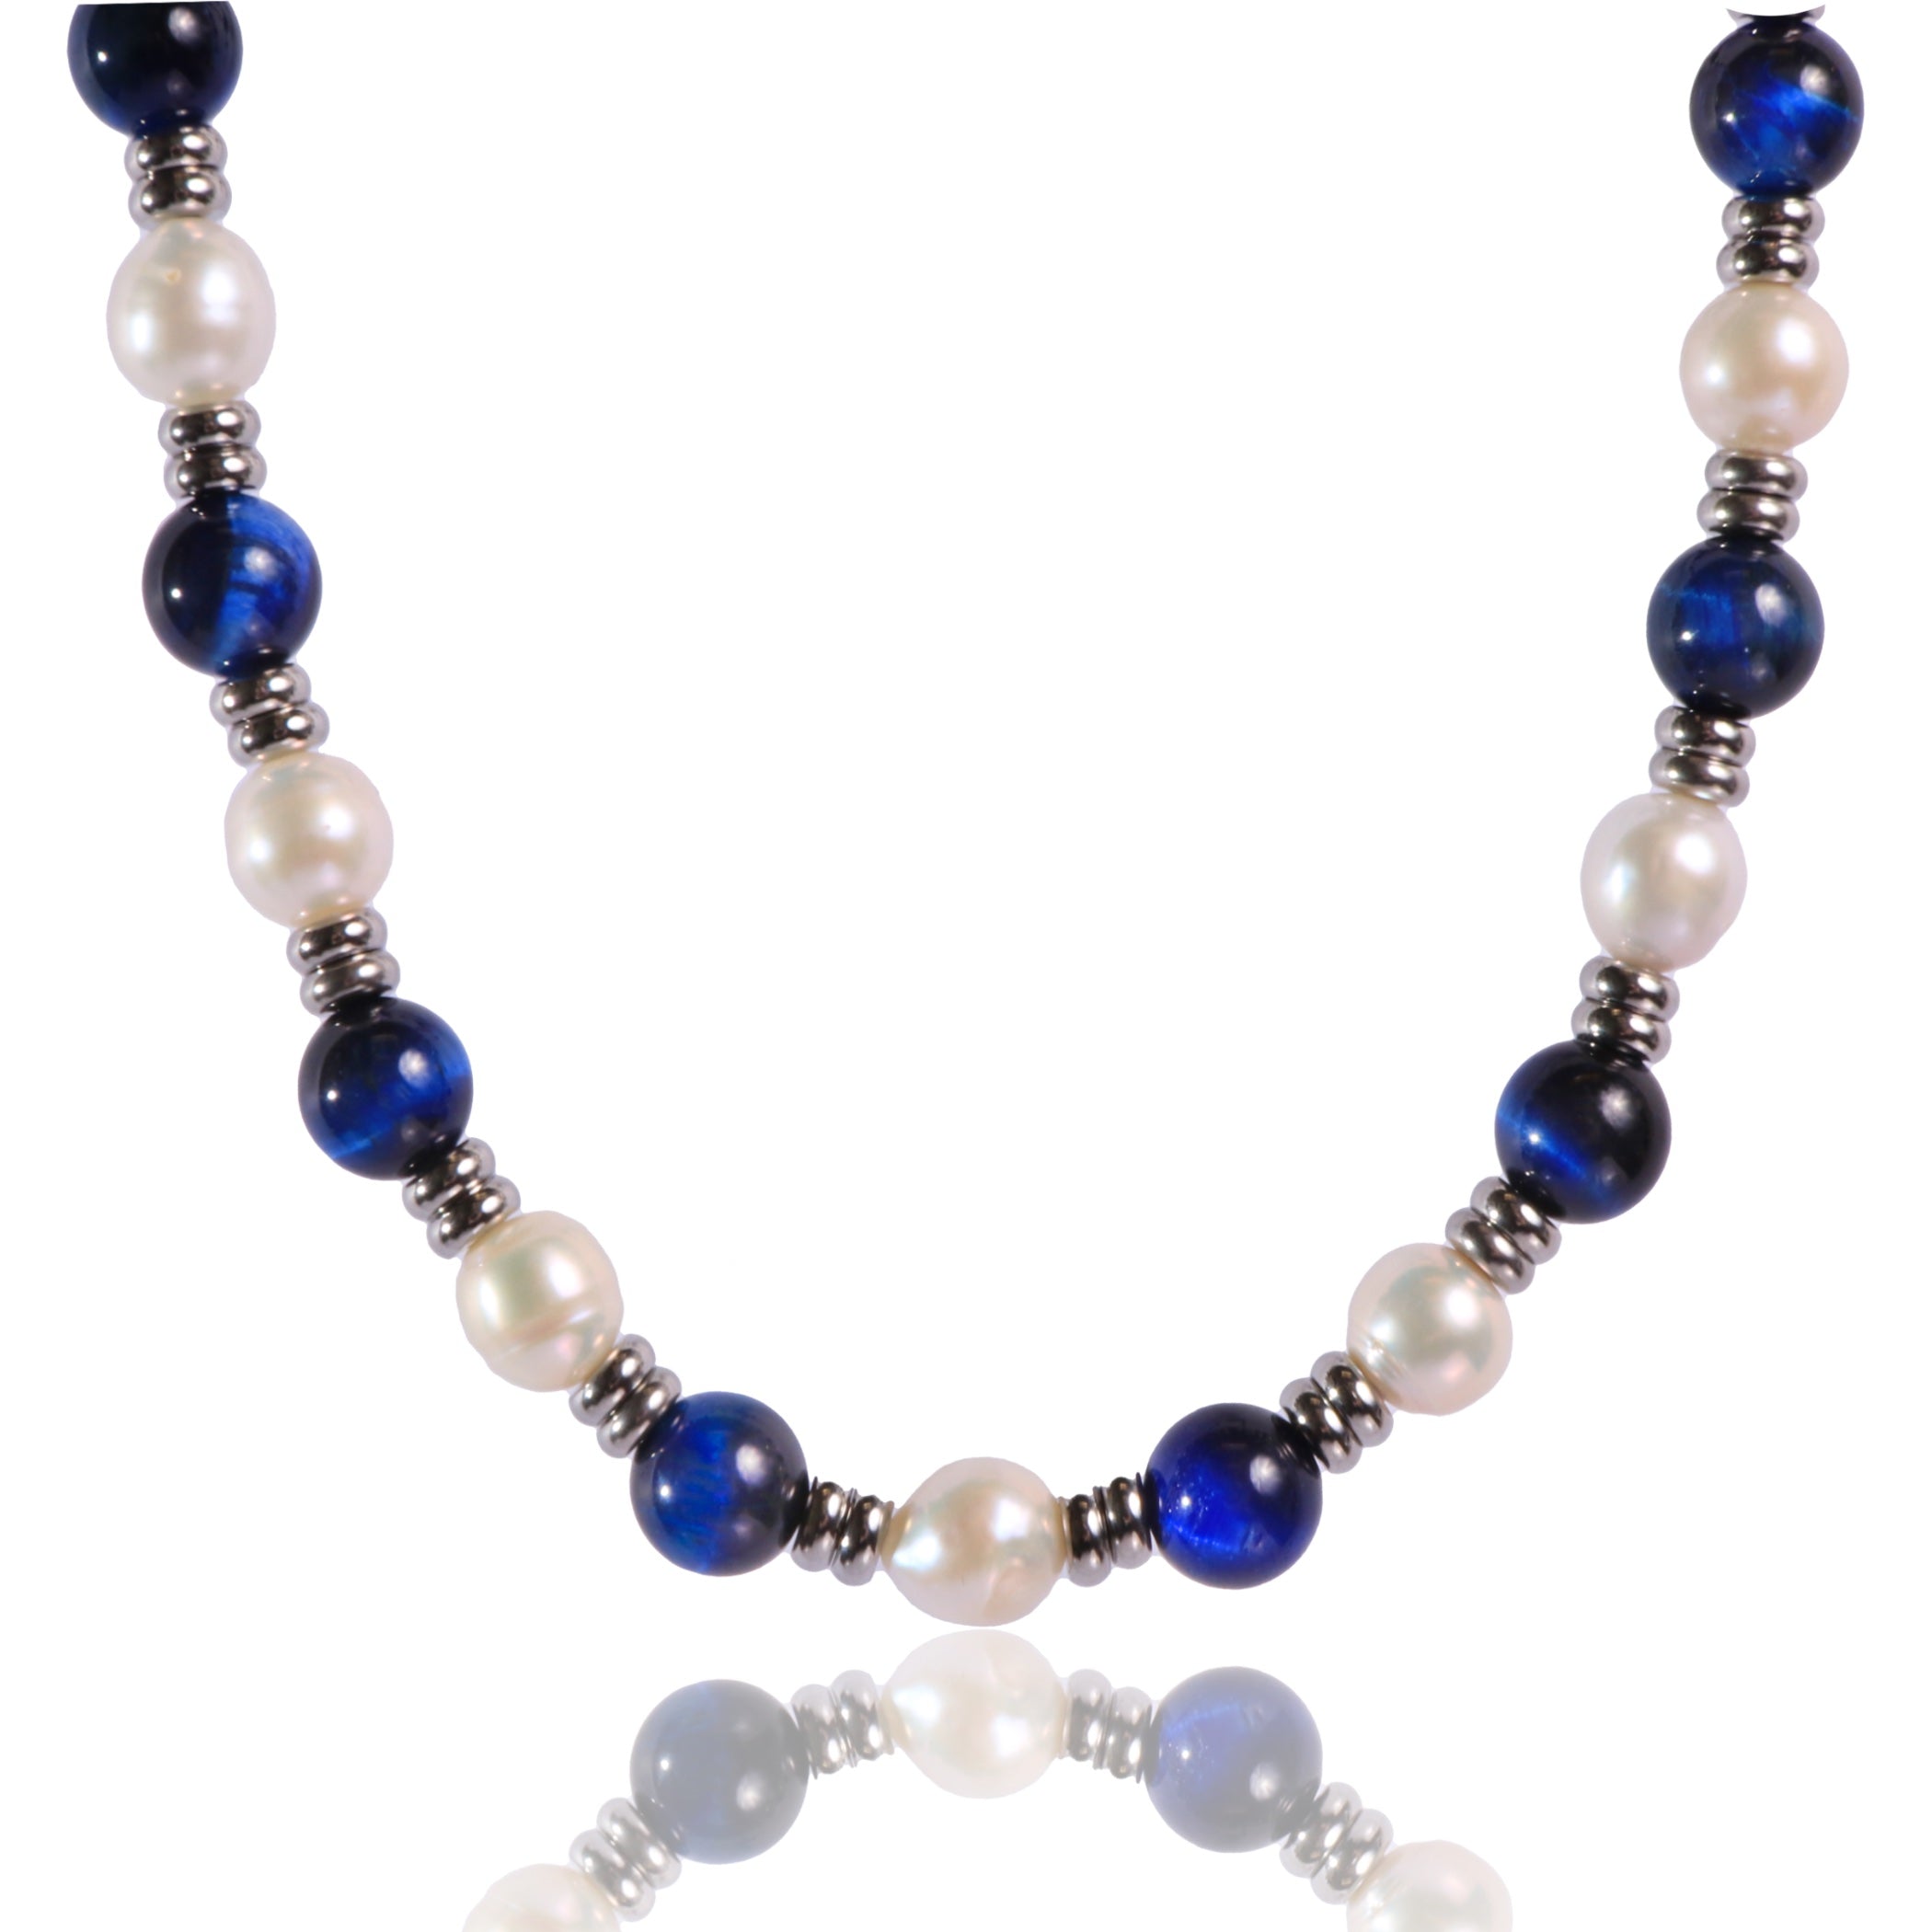 PEARL AND BLU STONE NICKLACE